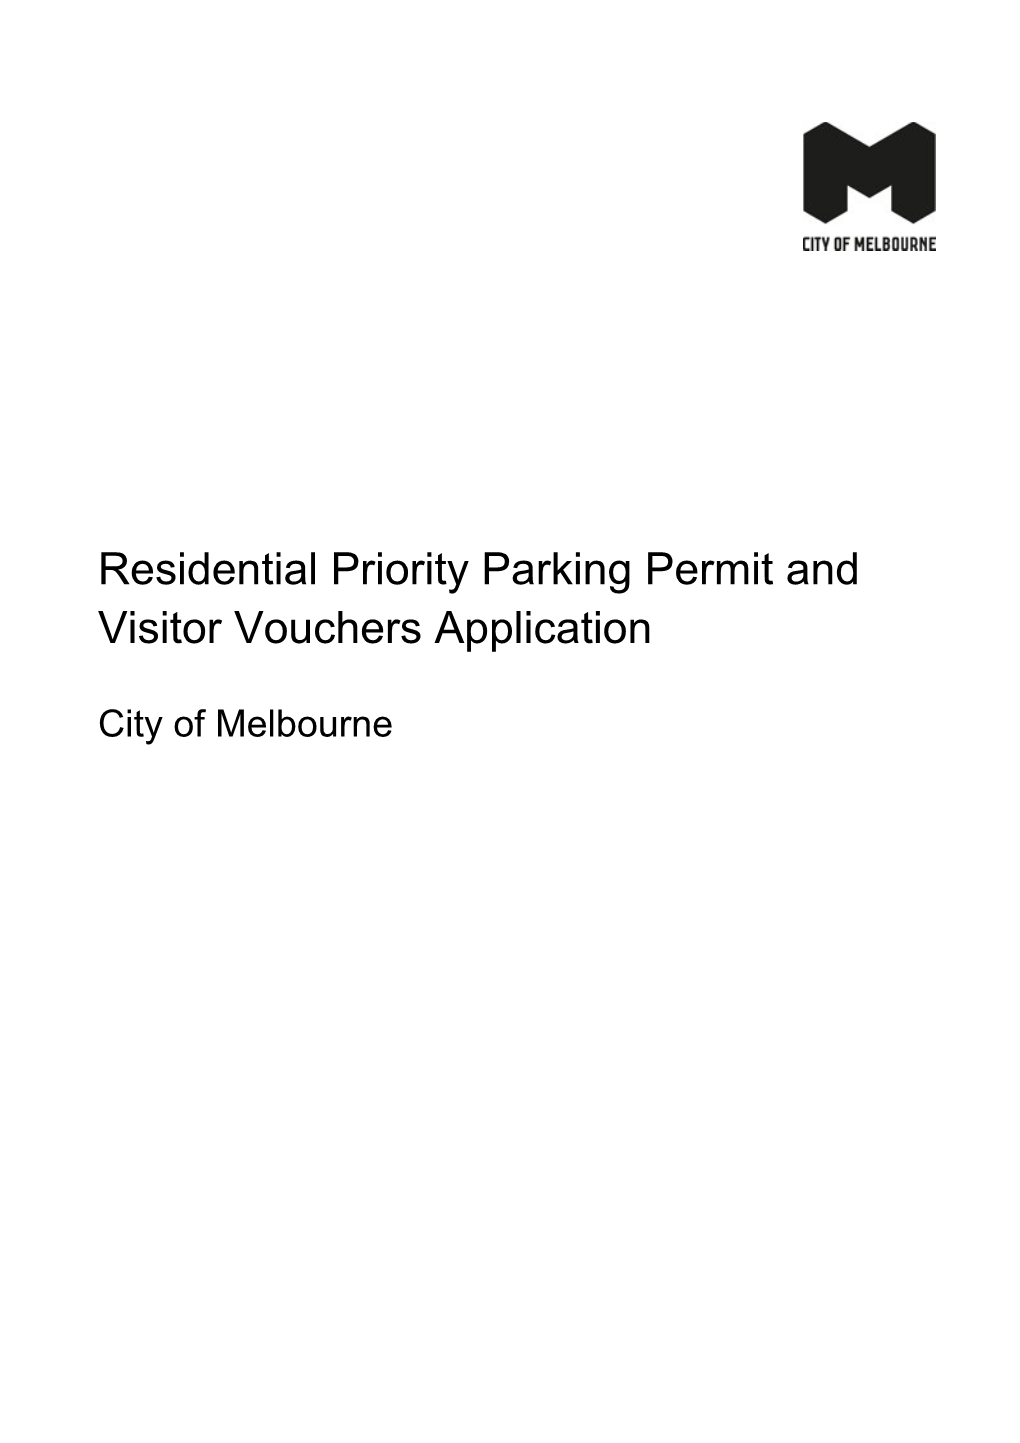 Residential Priority Parking Permit and Visitor Vouchers Application